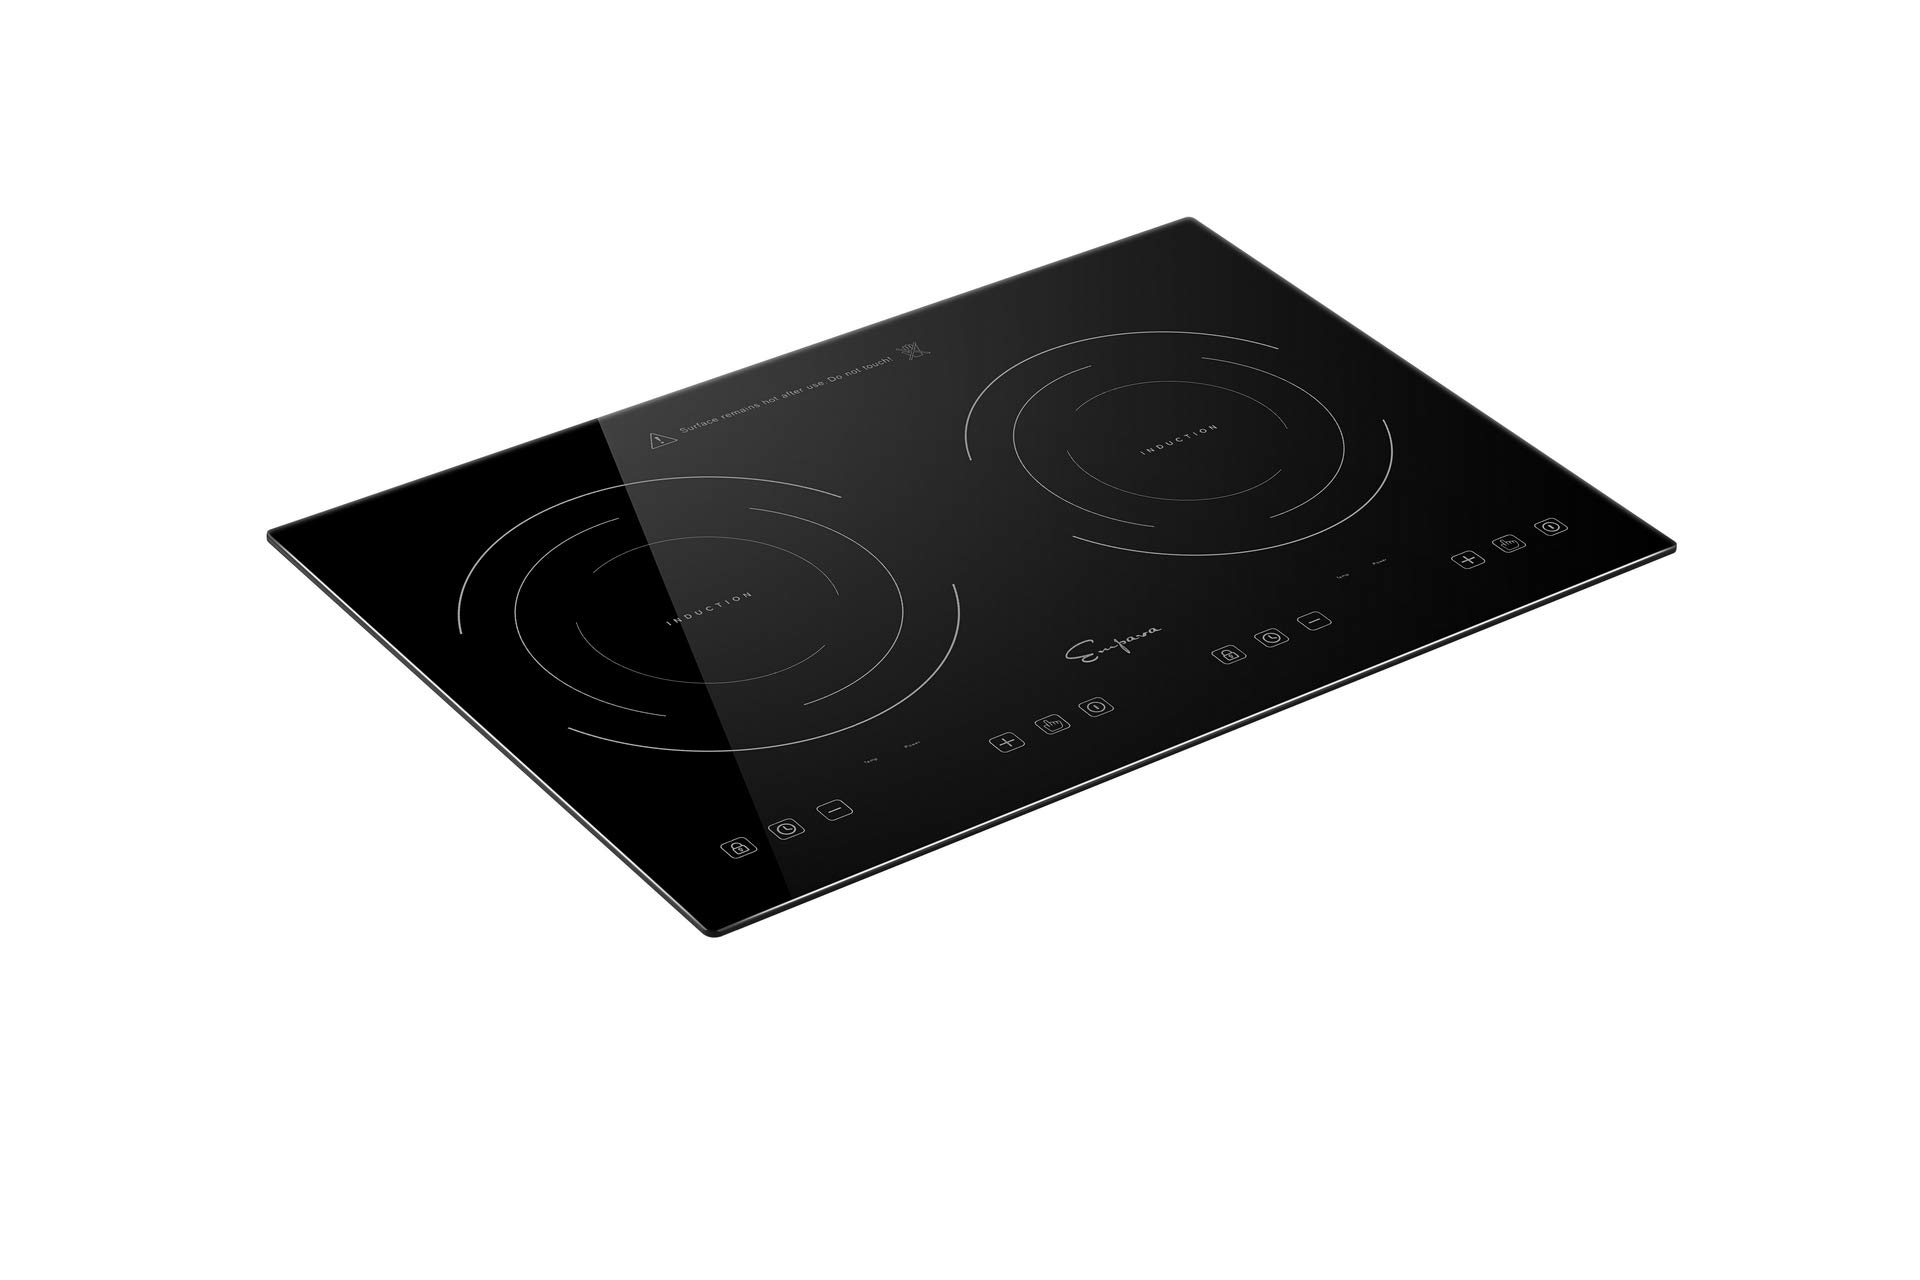 Empava IDC12B2 Horizontal Electric Stove Induction Cooktop with 2 Burners in Black Vitro Ceramic Smooth Surface Glass 120V, 12 Inch